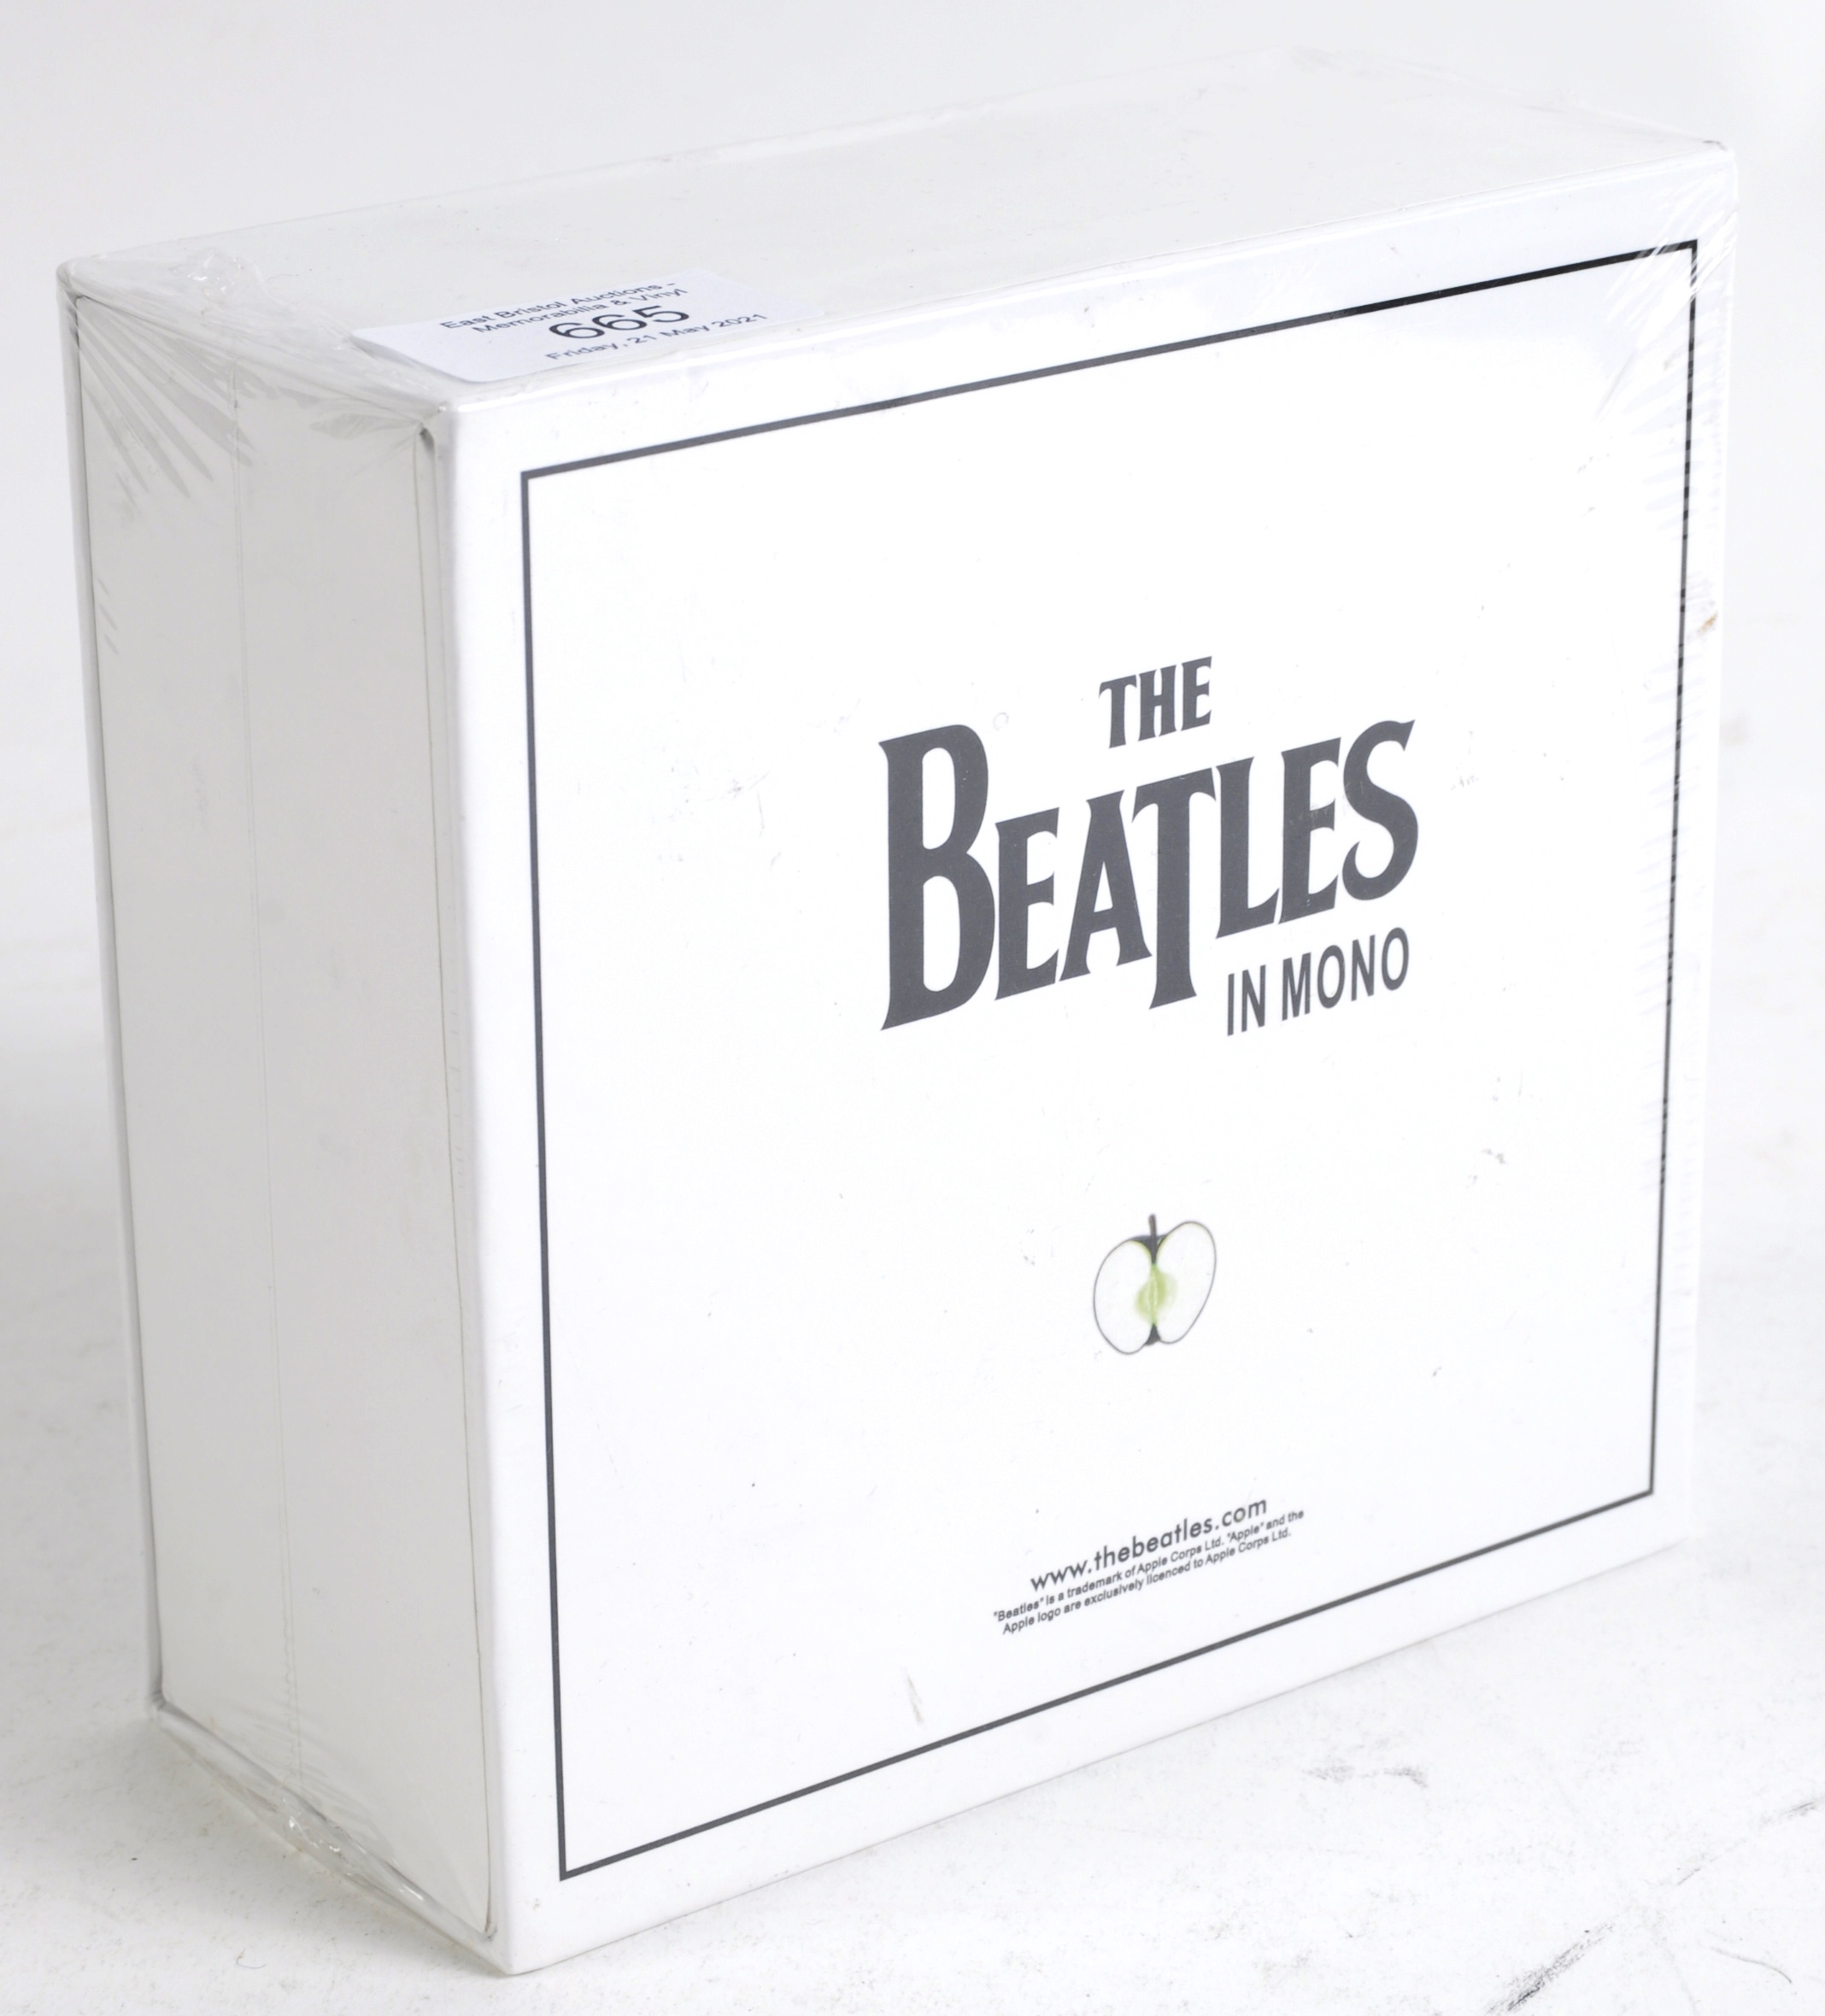 THE BEATLES IN MONO CD BOX SET BRAND NEW AND SEALED - Image 3 of 3